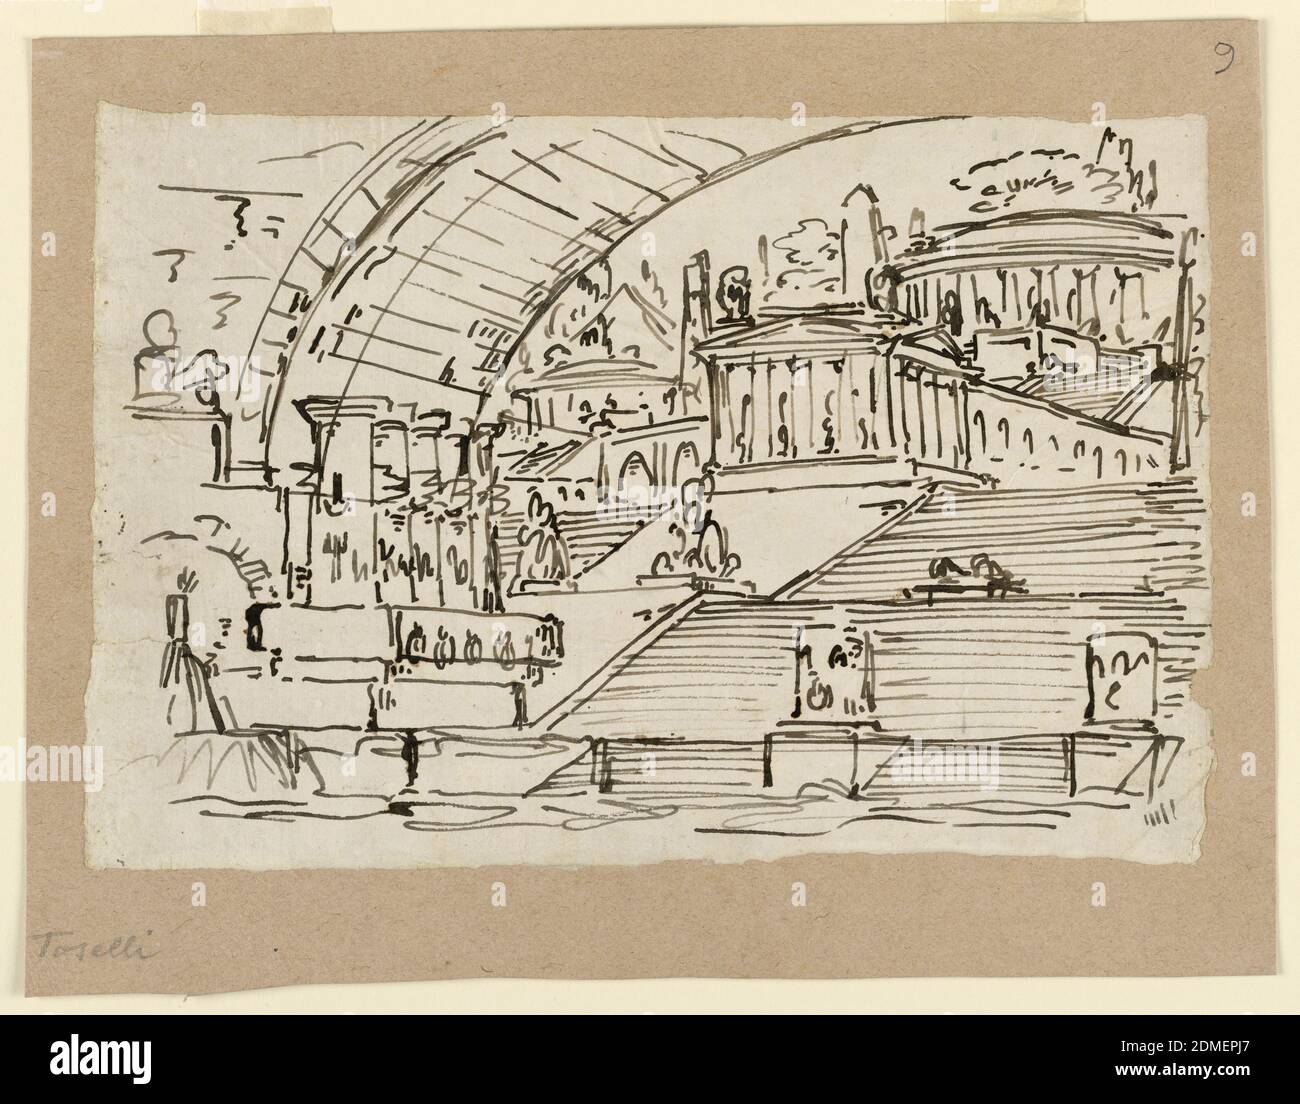 Stage Design, Imaginary City, Pen and brown ink on paper with uneven edges, lined with cream paper, Horizontal rectangle. Design for a stage set. Broad staircases leading up to a group of classical temples of various shapes (rectangular and round). A large arch spans above the staircases., Italy, early 19th century, theater, Drawing Stock Photo